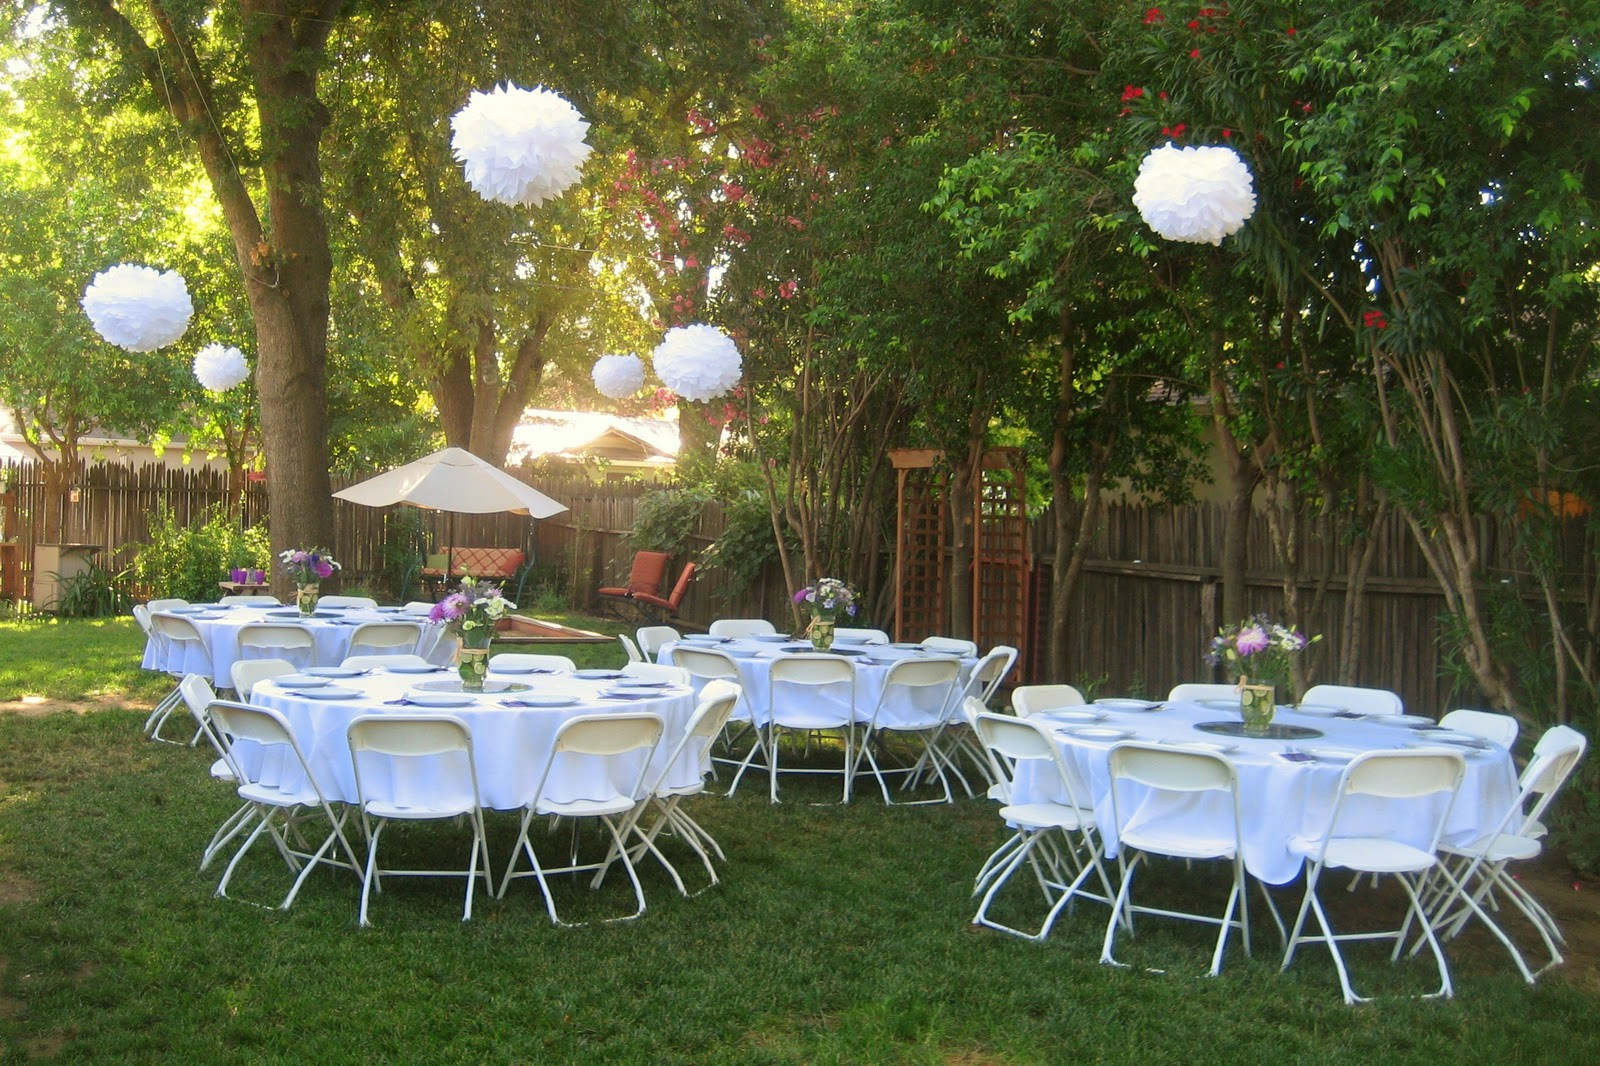 Decoration Ideas For Backyard Party
 A resting place for pleted Projects Backyard Bridal